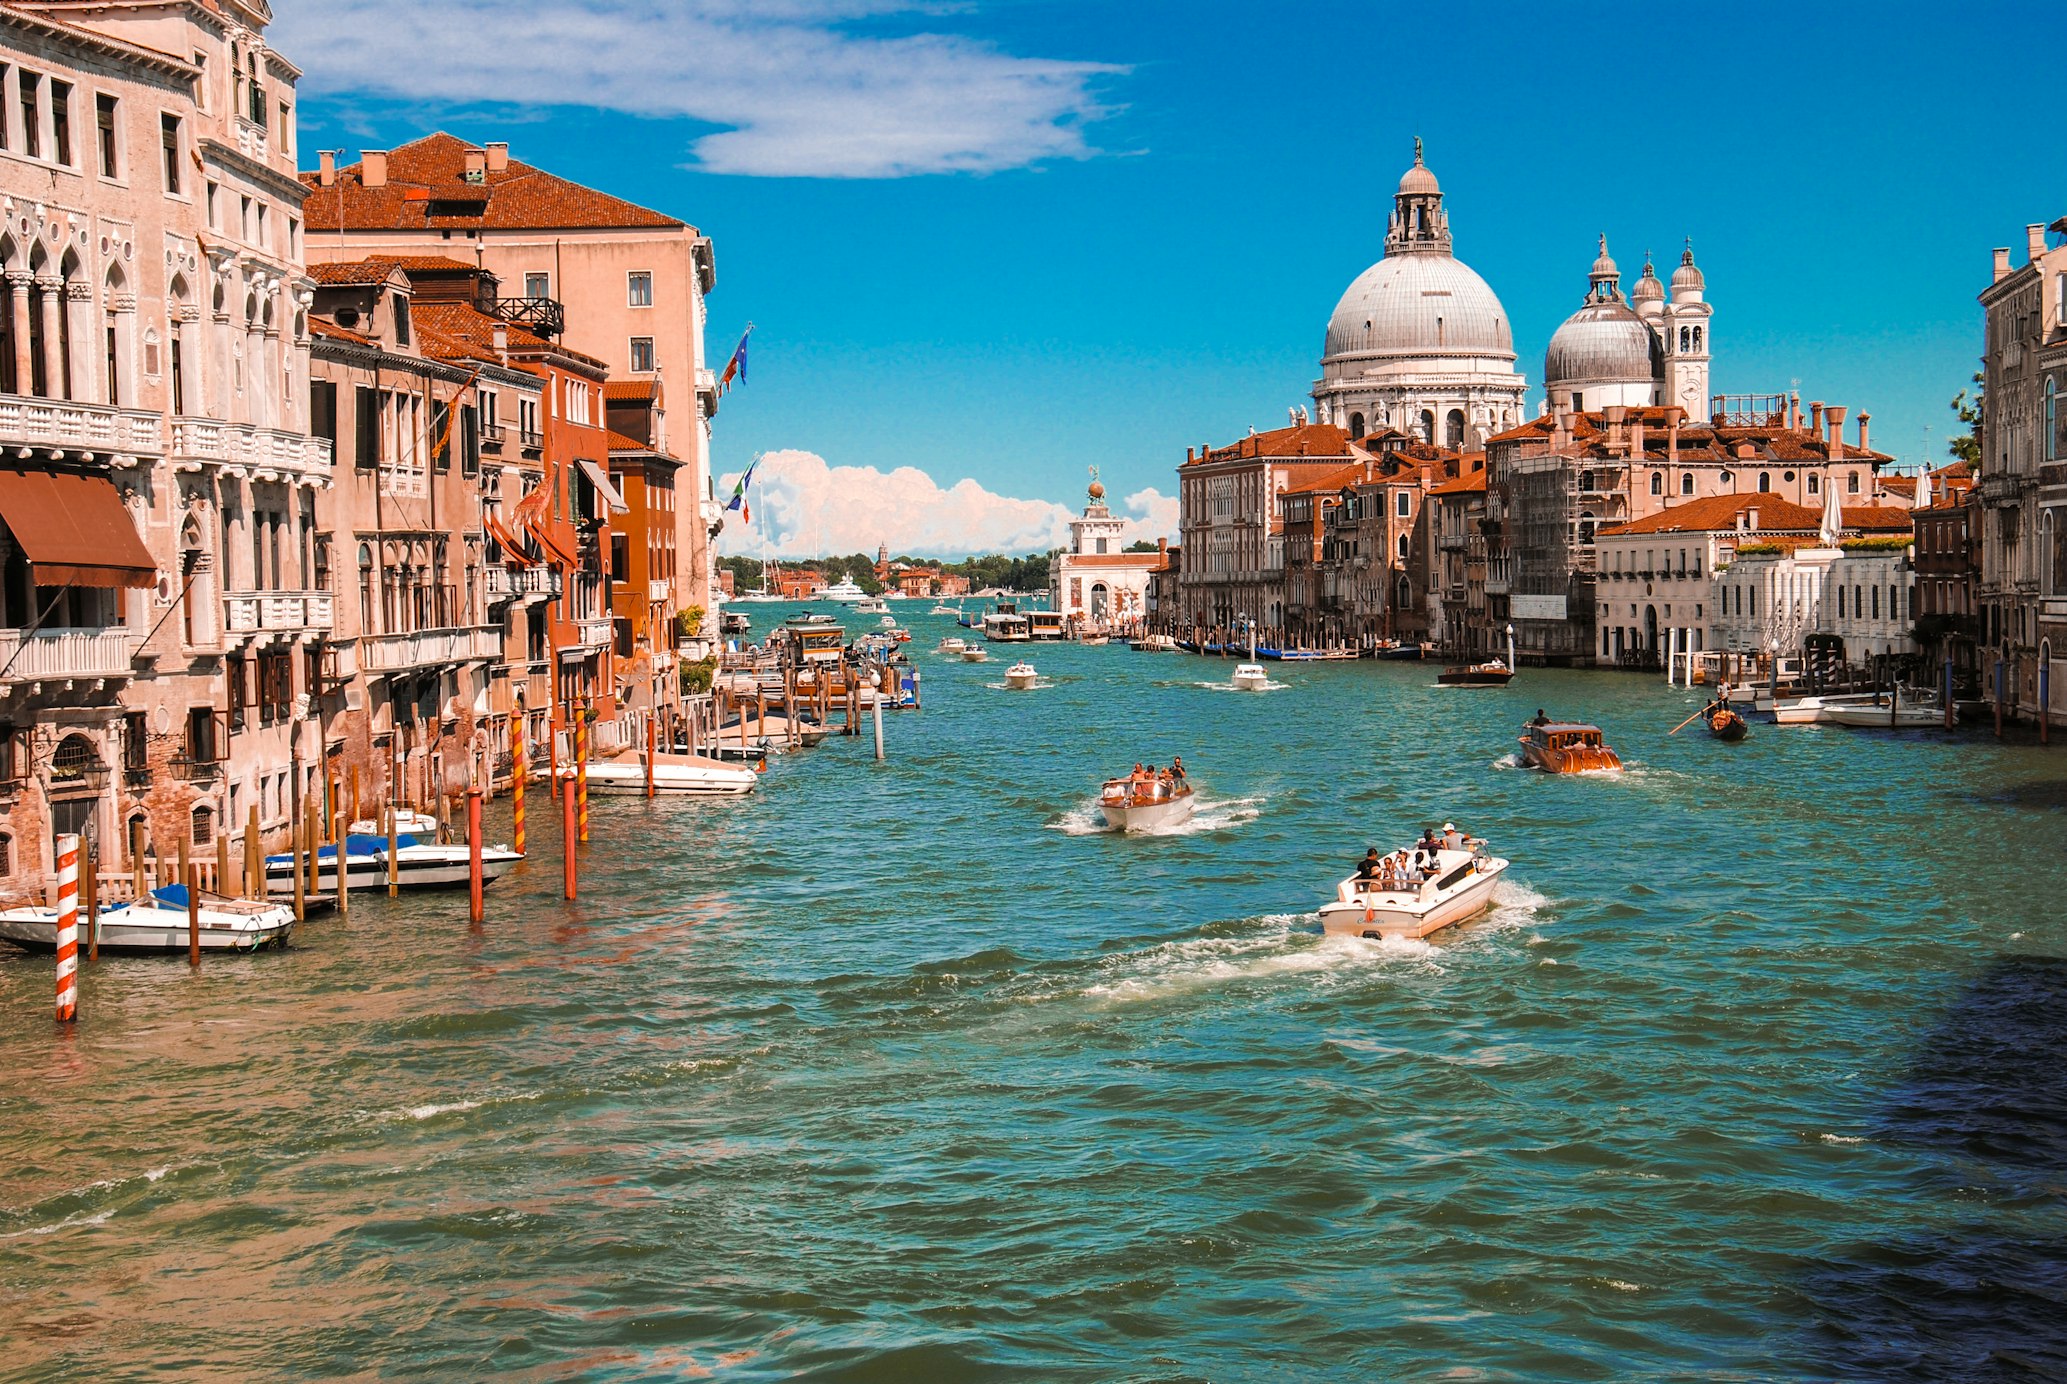 Italy Travel Guide - Attractions, What to See, Do, Costs, FAQs